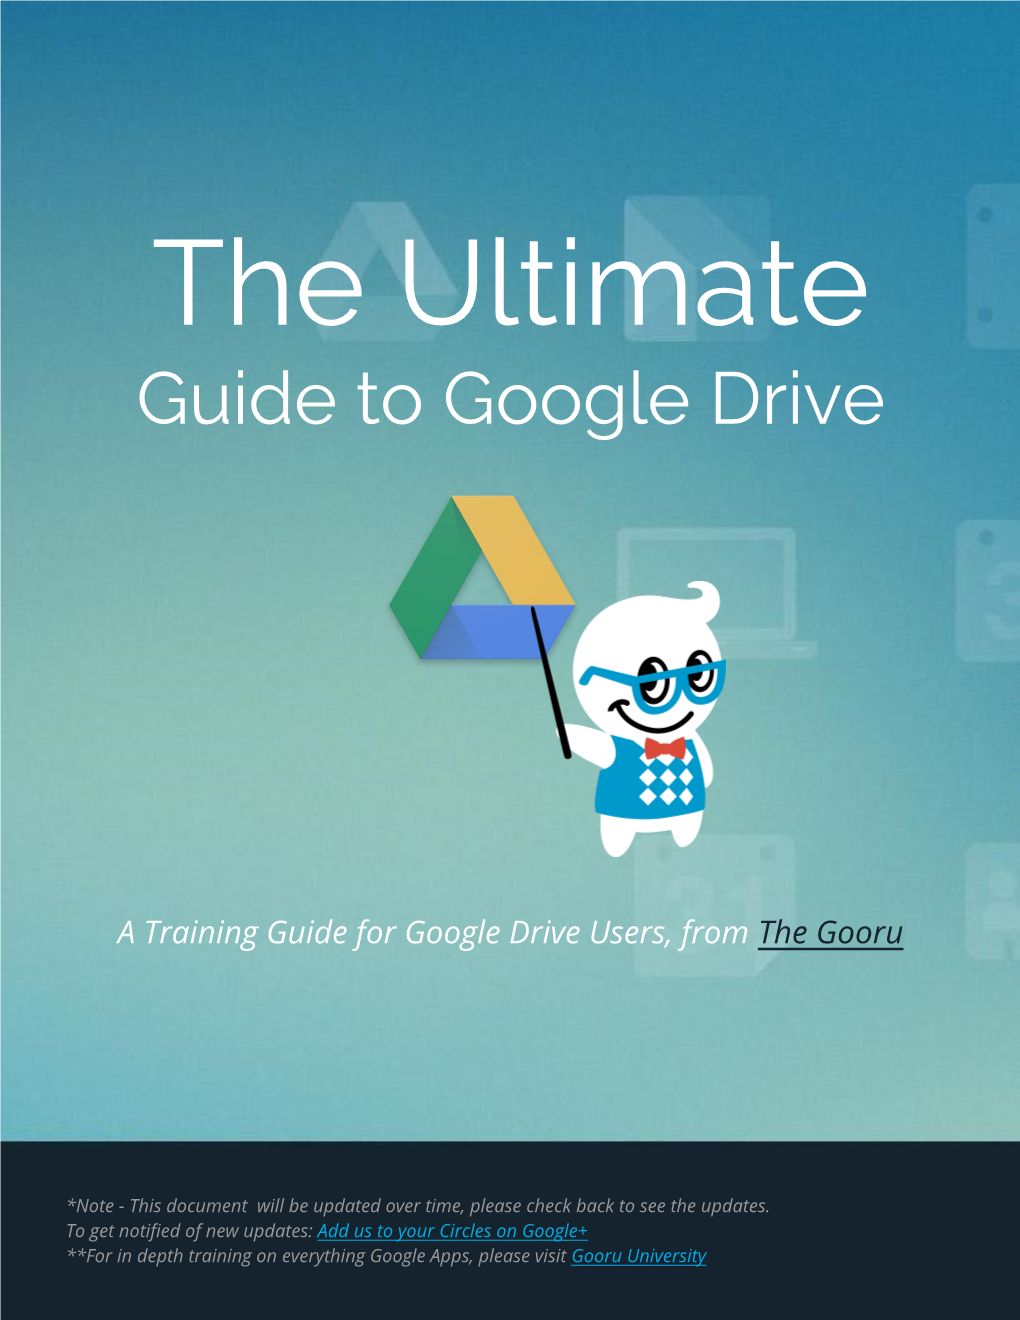 Guide to Google Drive